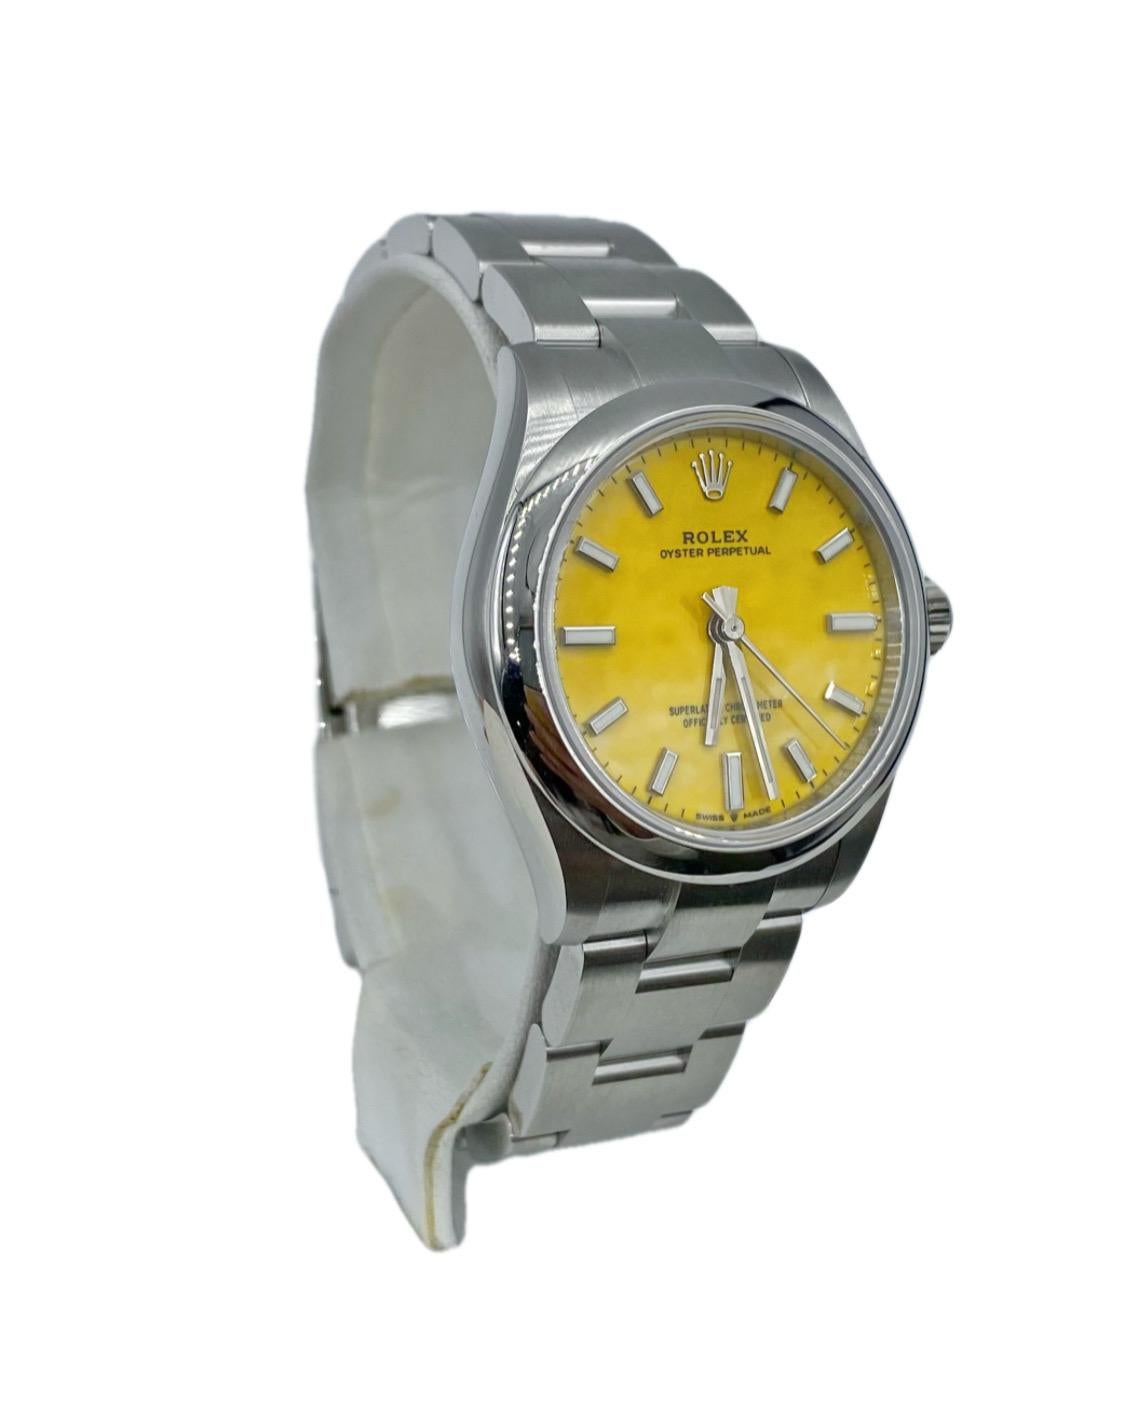 Unworn Rolex Oyster Perpetual 277200-0005, 31 mm. The watch has Yellow Dial. The Case is Oystersteel w/ 2232 Movement, 55 hours power reserve. The Bracelet Oystersteel with Folding Oysterclasp with Easylink 5 mm comfort extension link. The